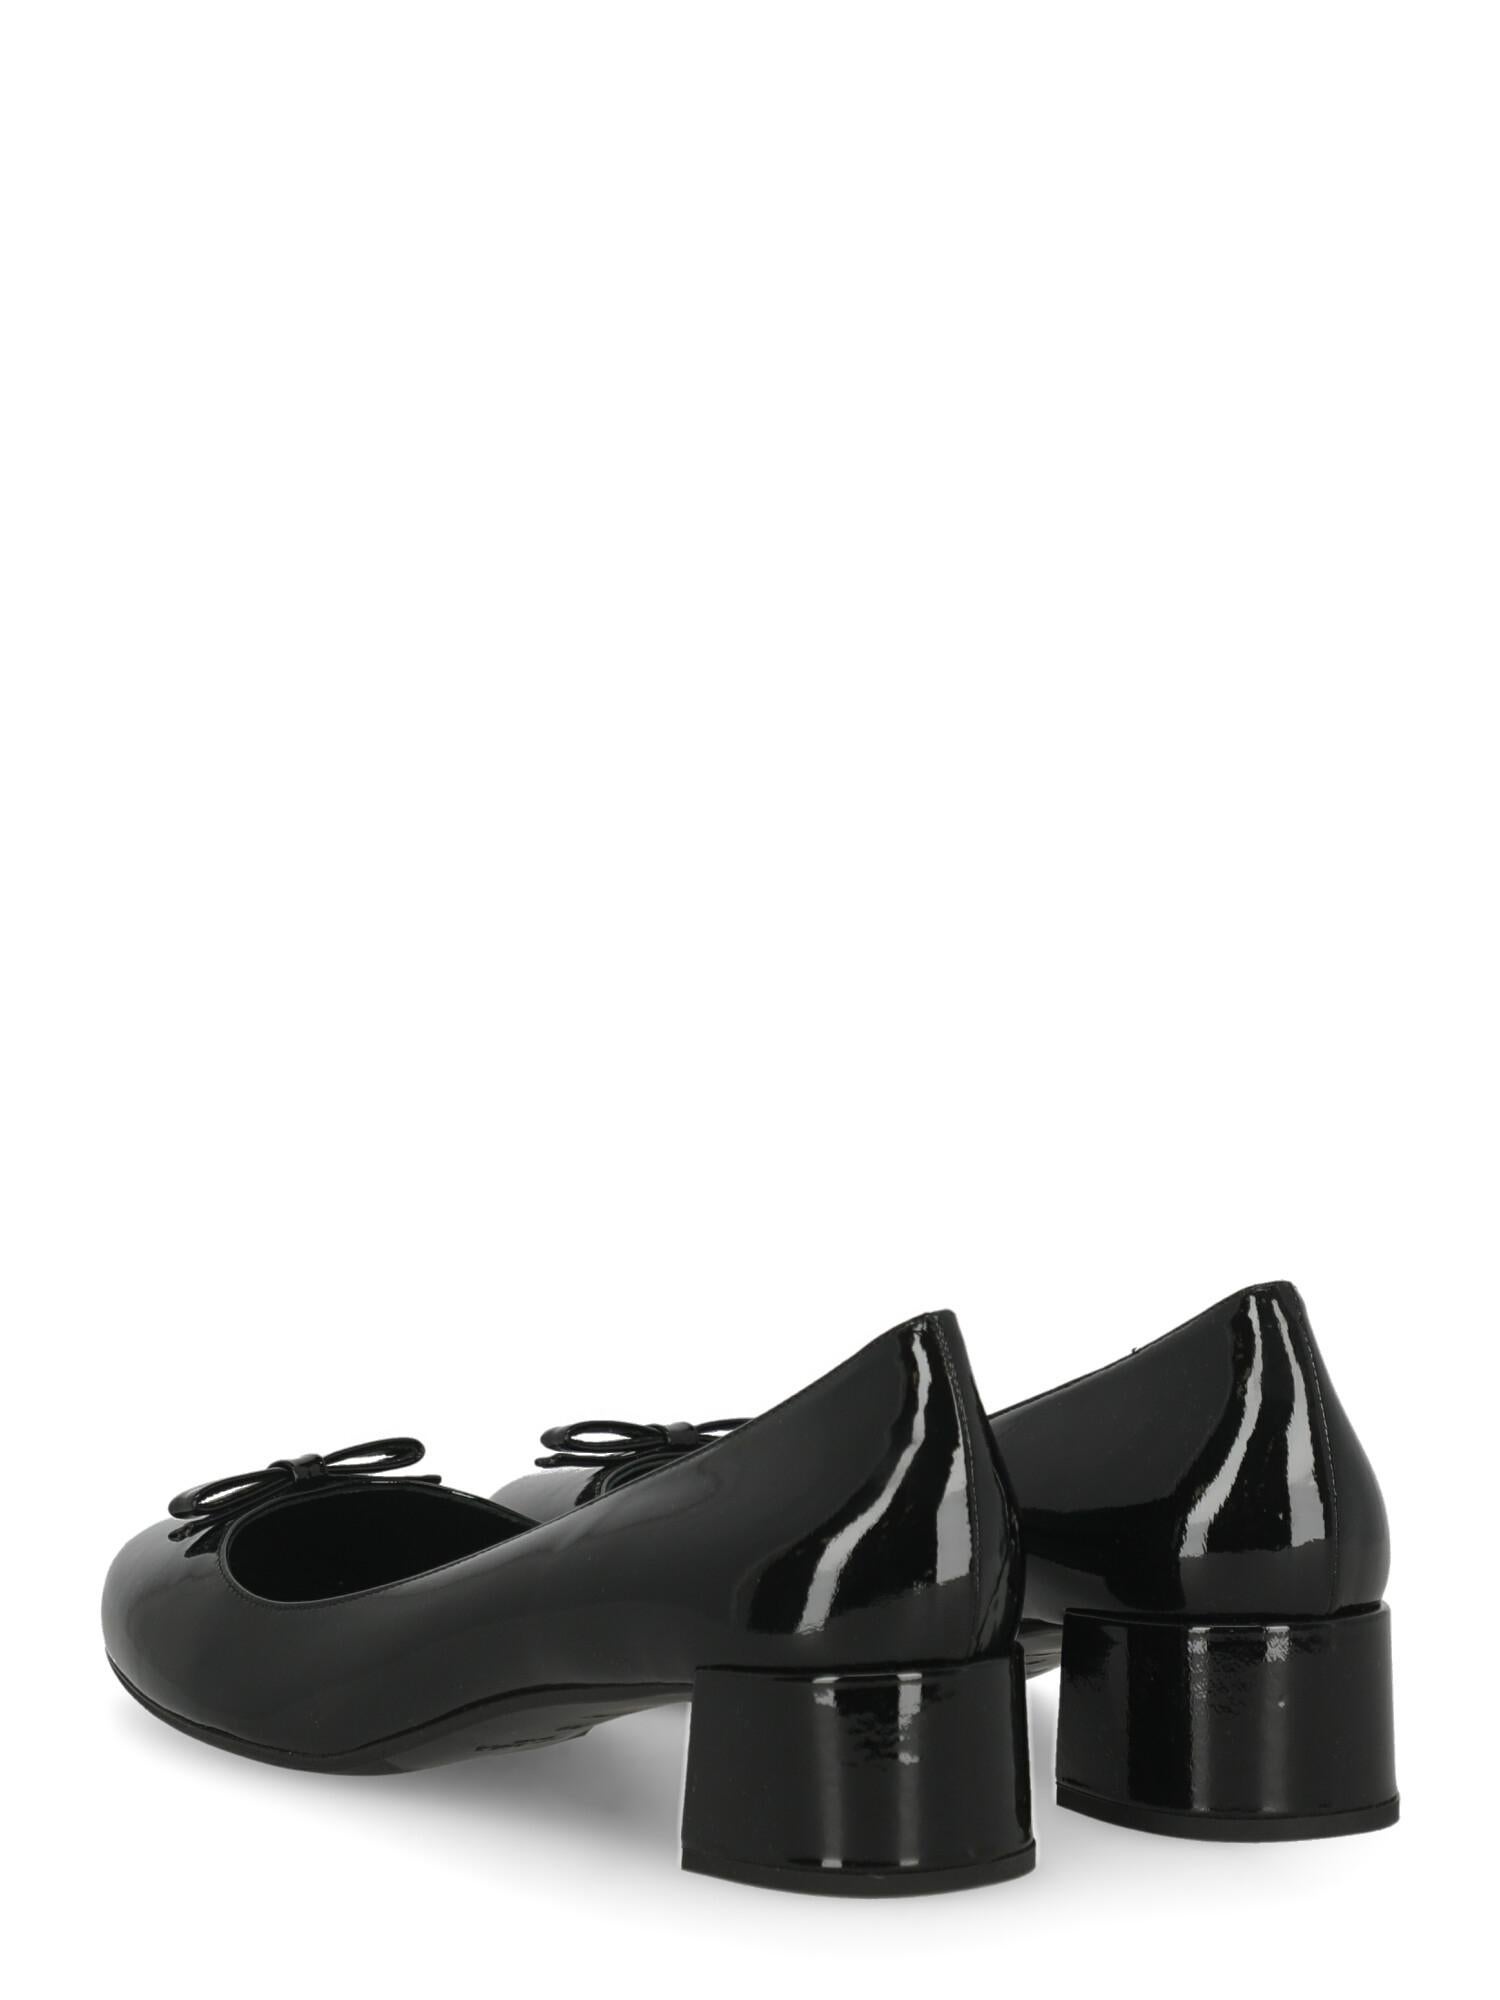 Prada  Women   Pumps  Black Leather EU 39 In Excellent Condition For Sale In Milan, IT